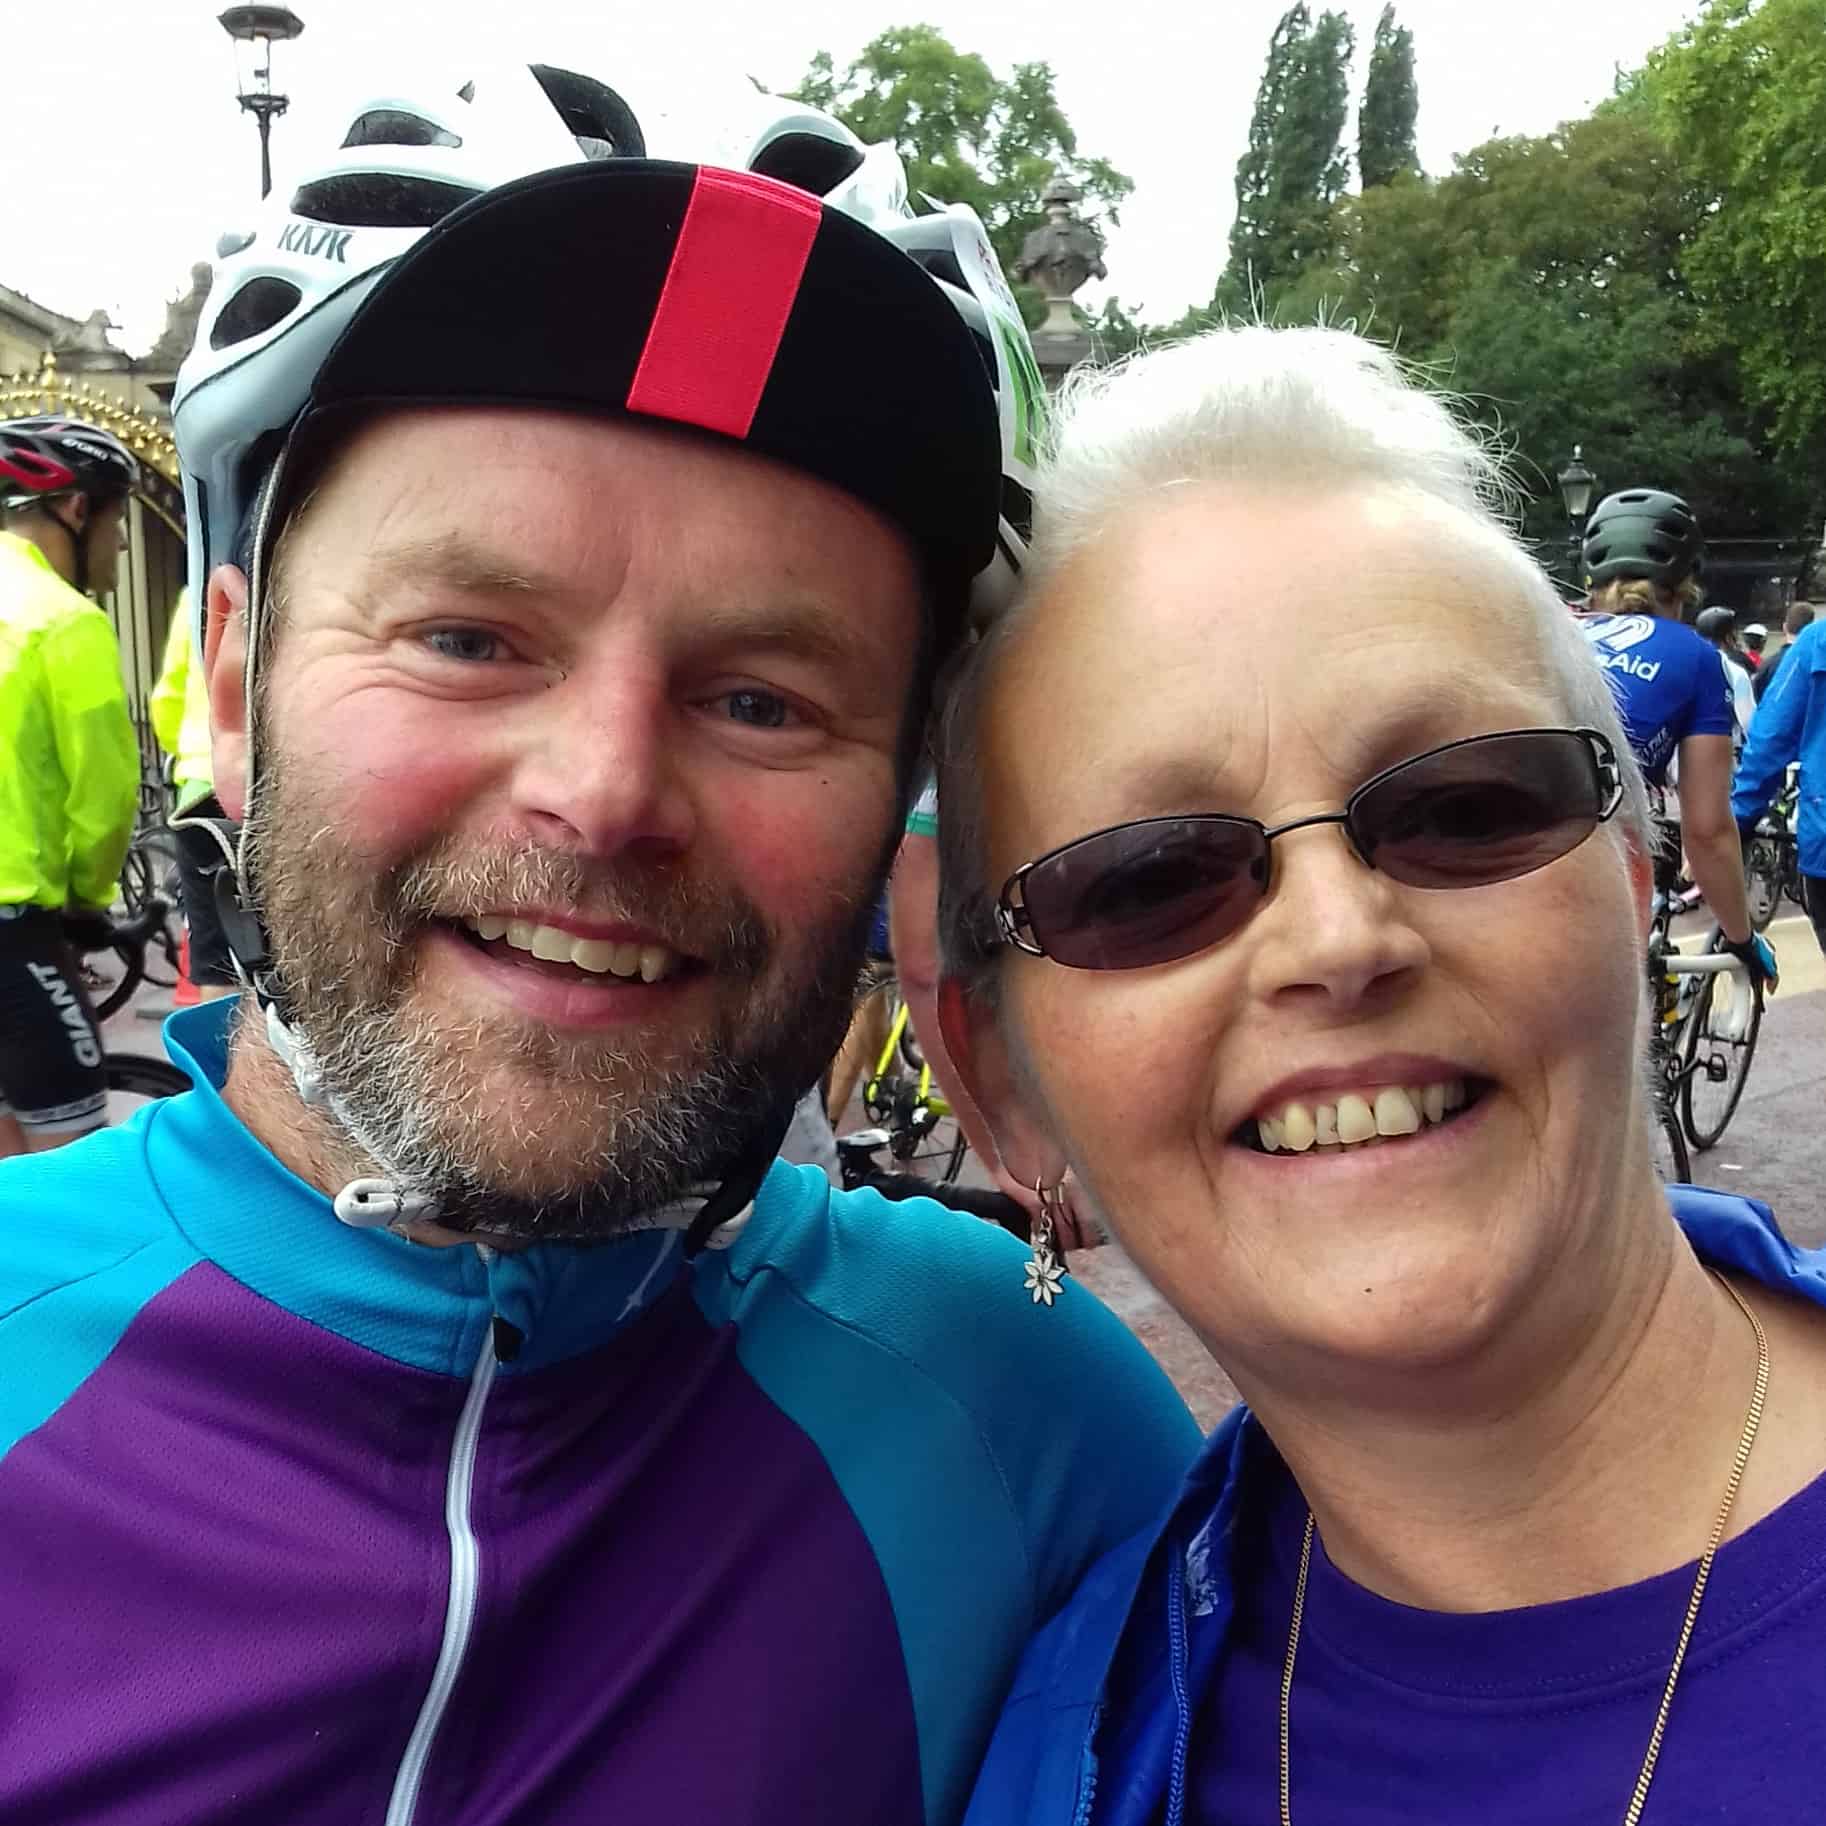 Photo of Helen and her brother at a RideLondon event. Helen is wearing a t-shirt and has short blond hair. She is wearing sunglasses. Her brother is wearing a cycling top and helmet.